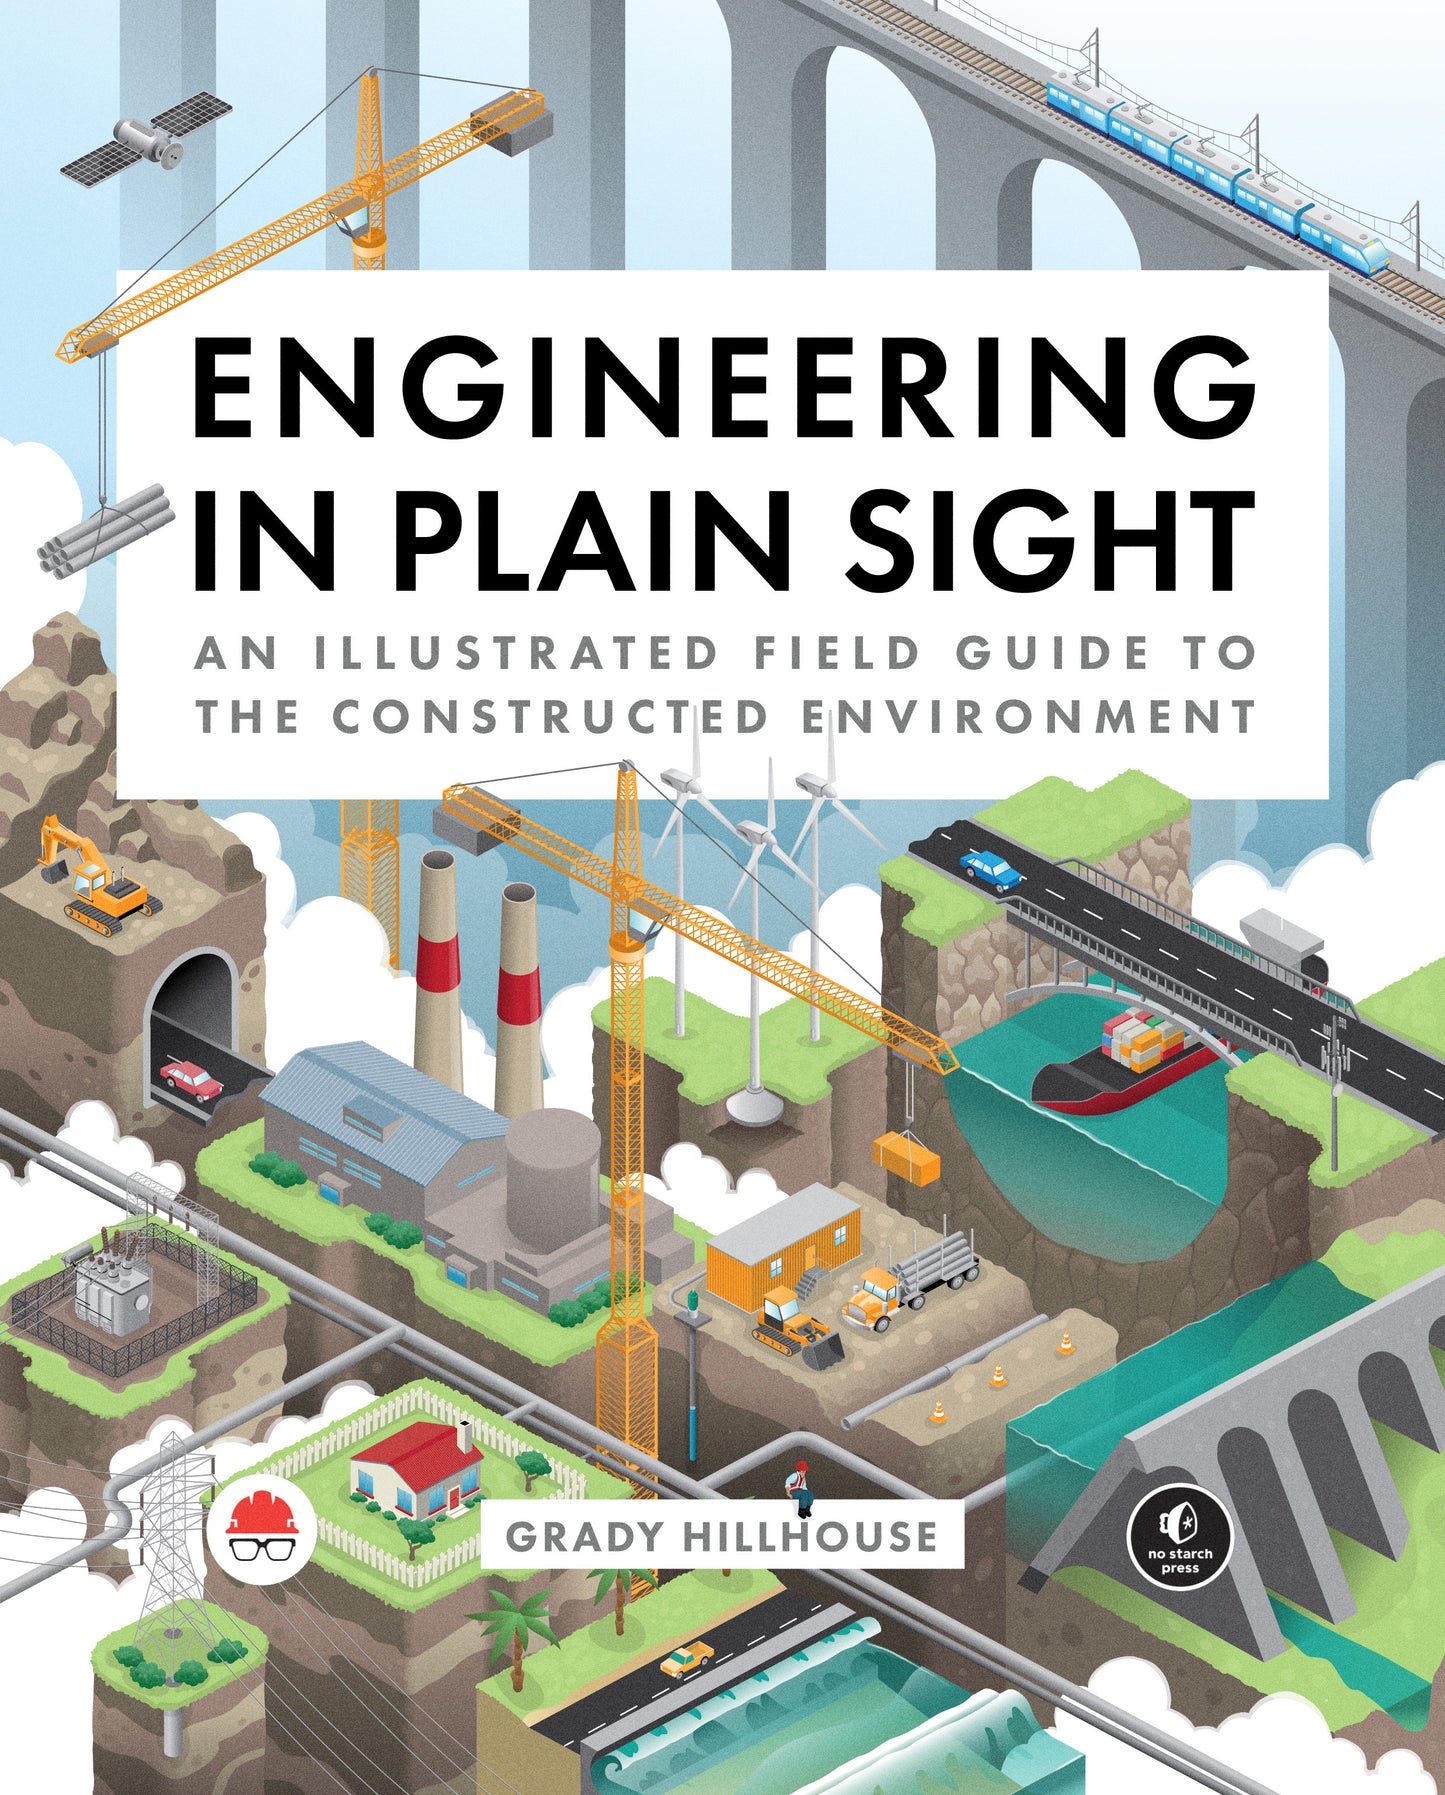 Engineering in Plain Sight (Signed Copy)